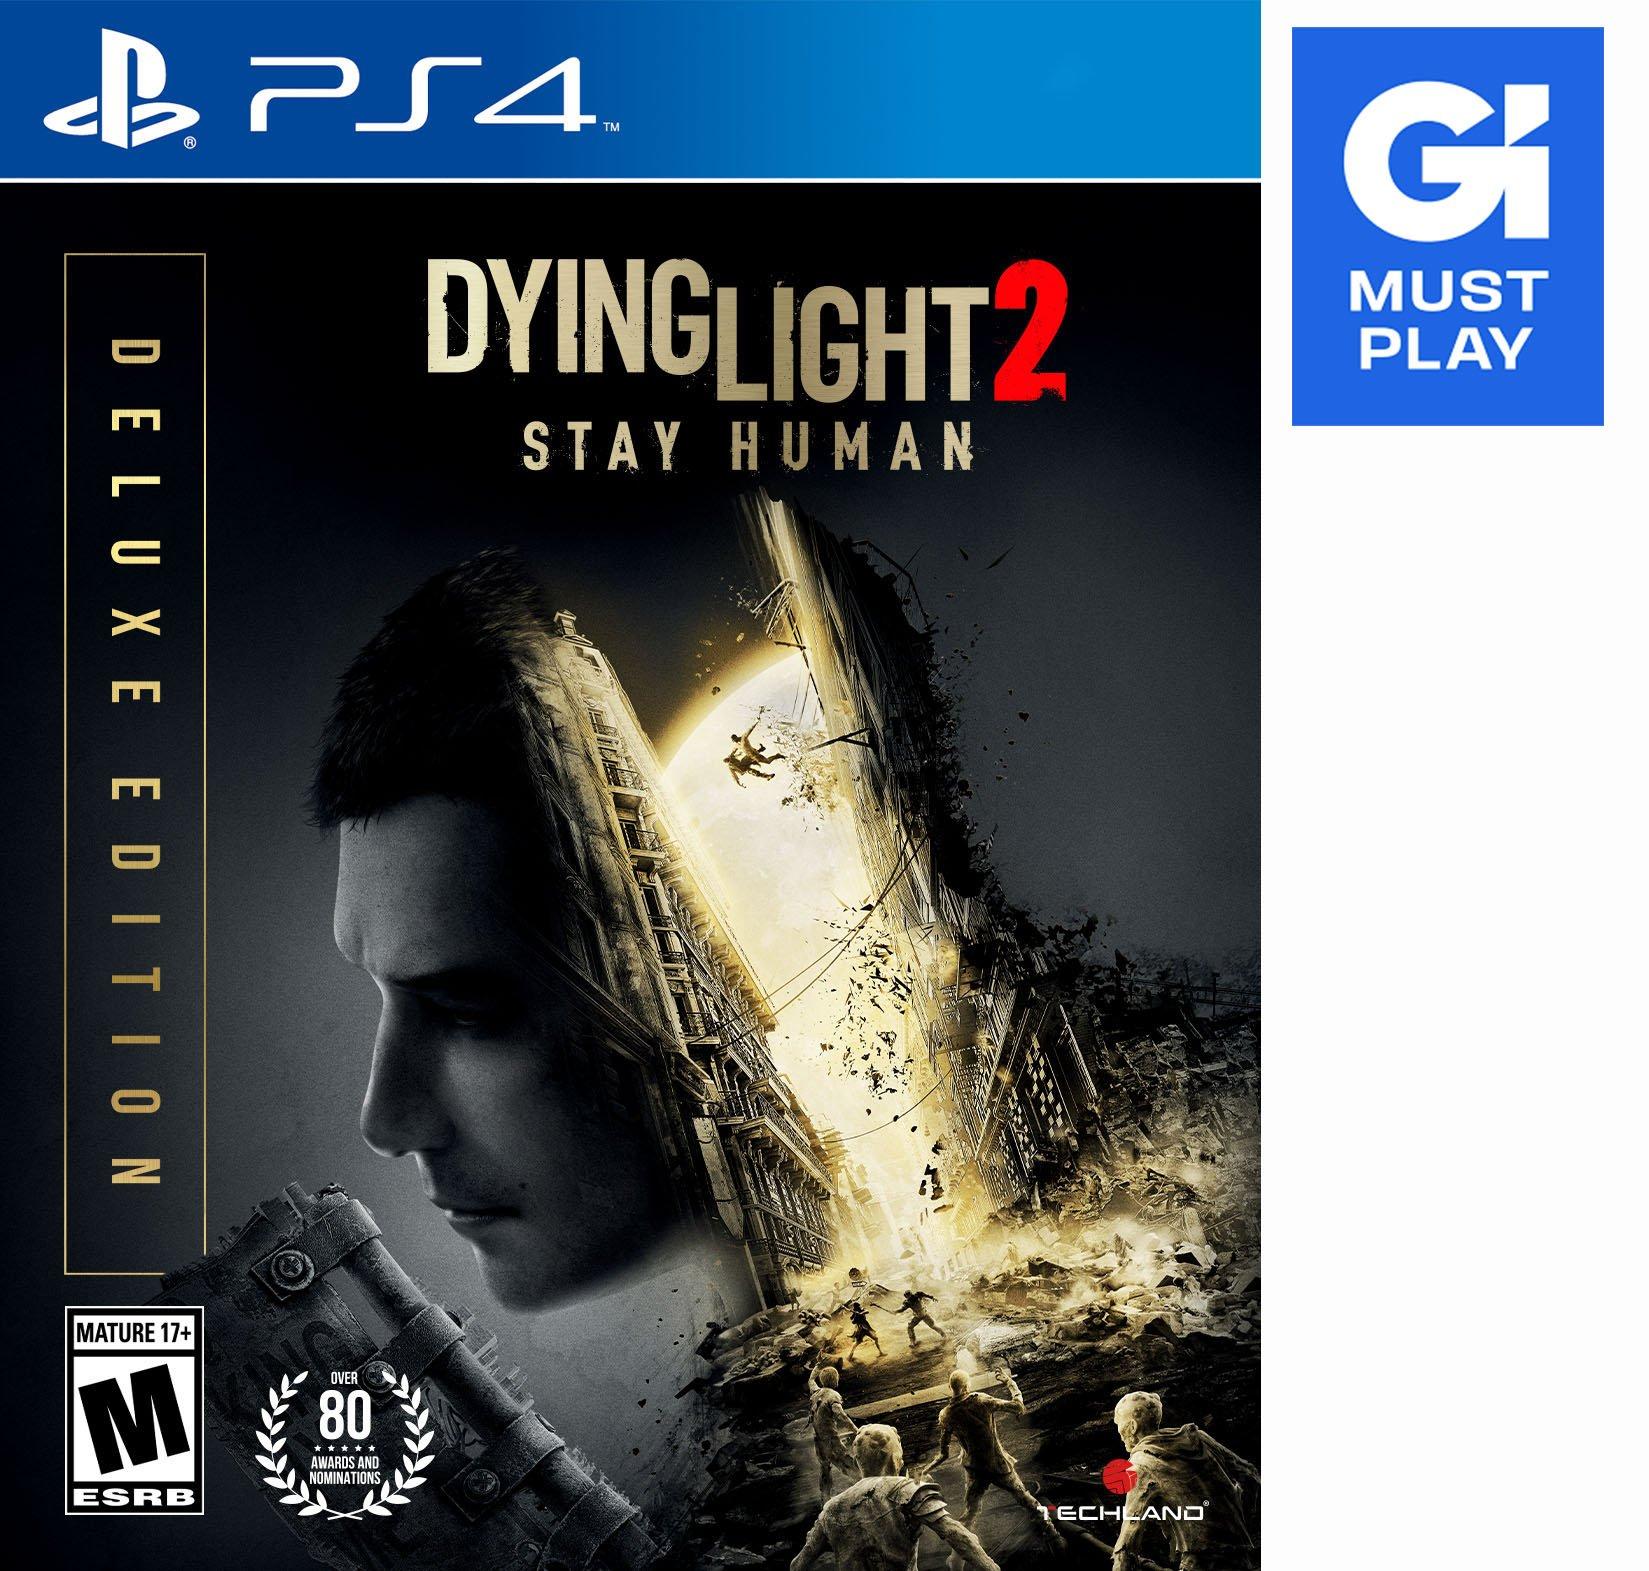 Dying Light 2 (PS4) cheap - Price of $17.80